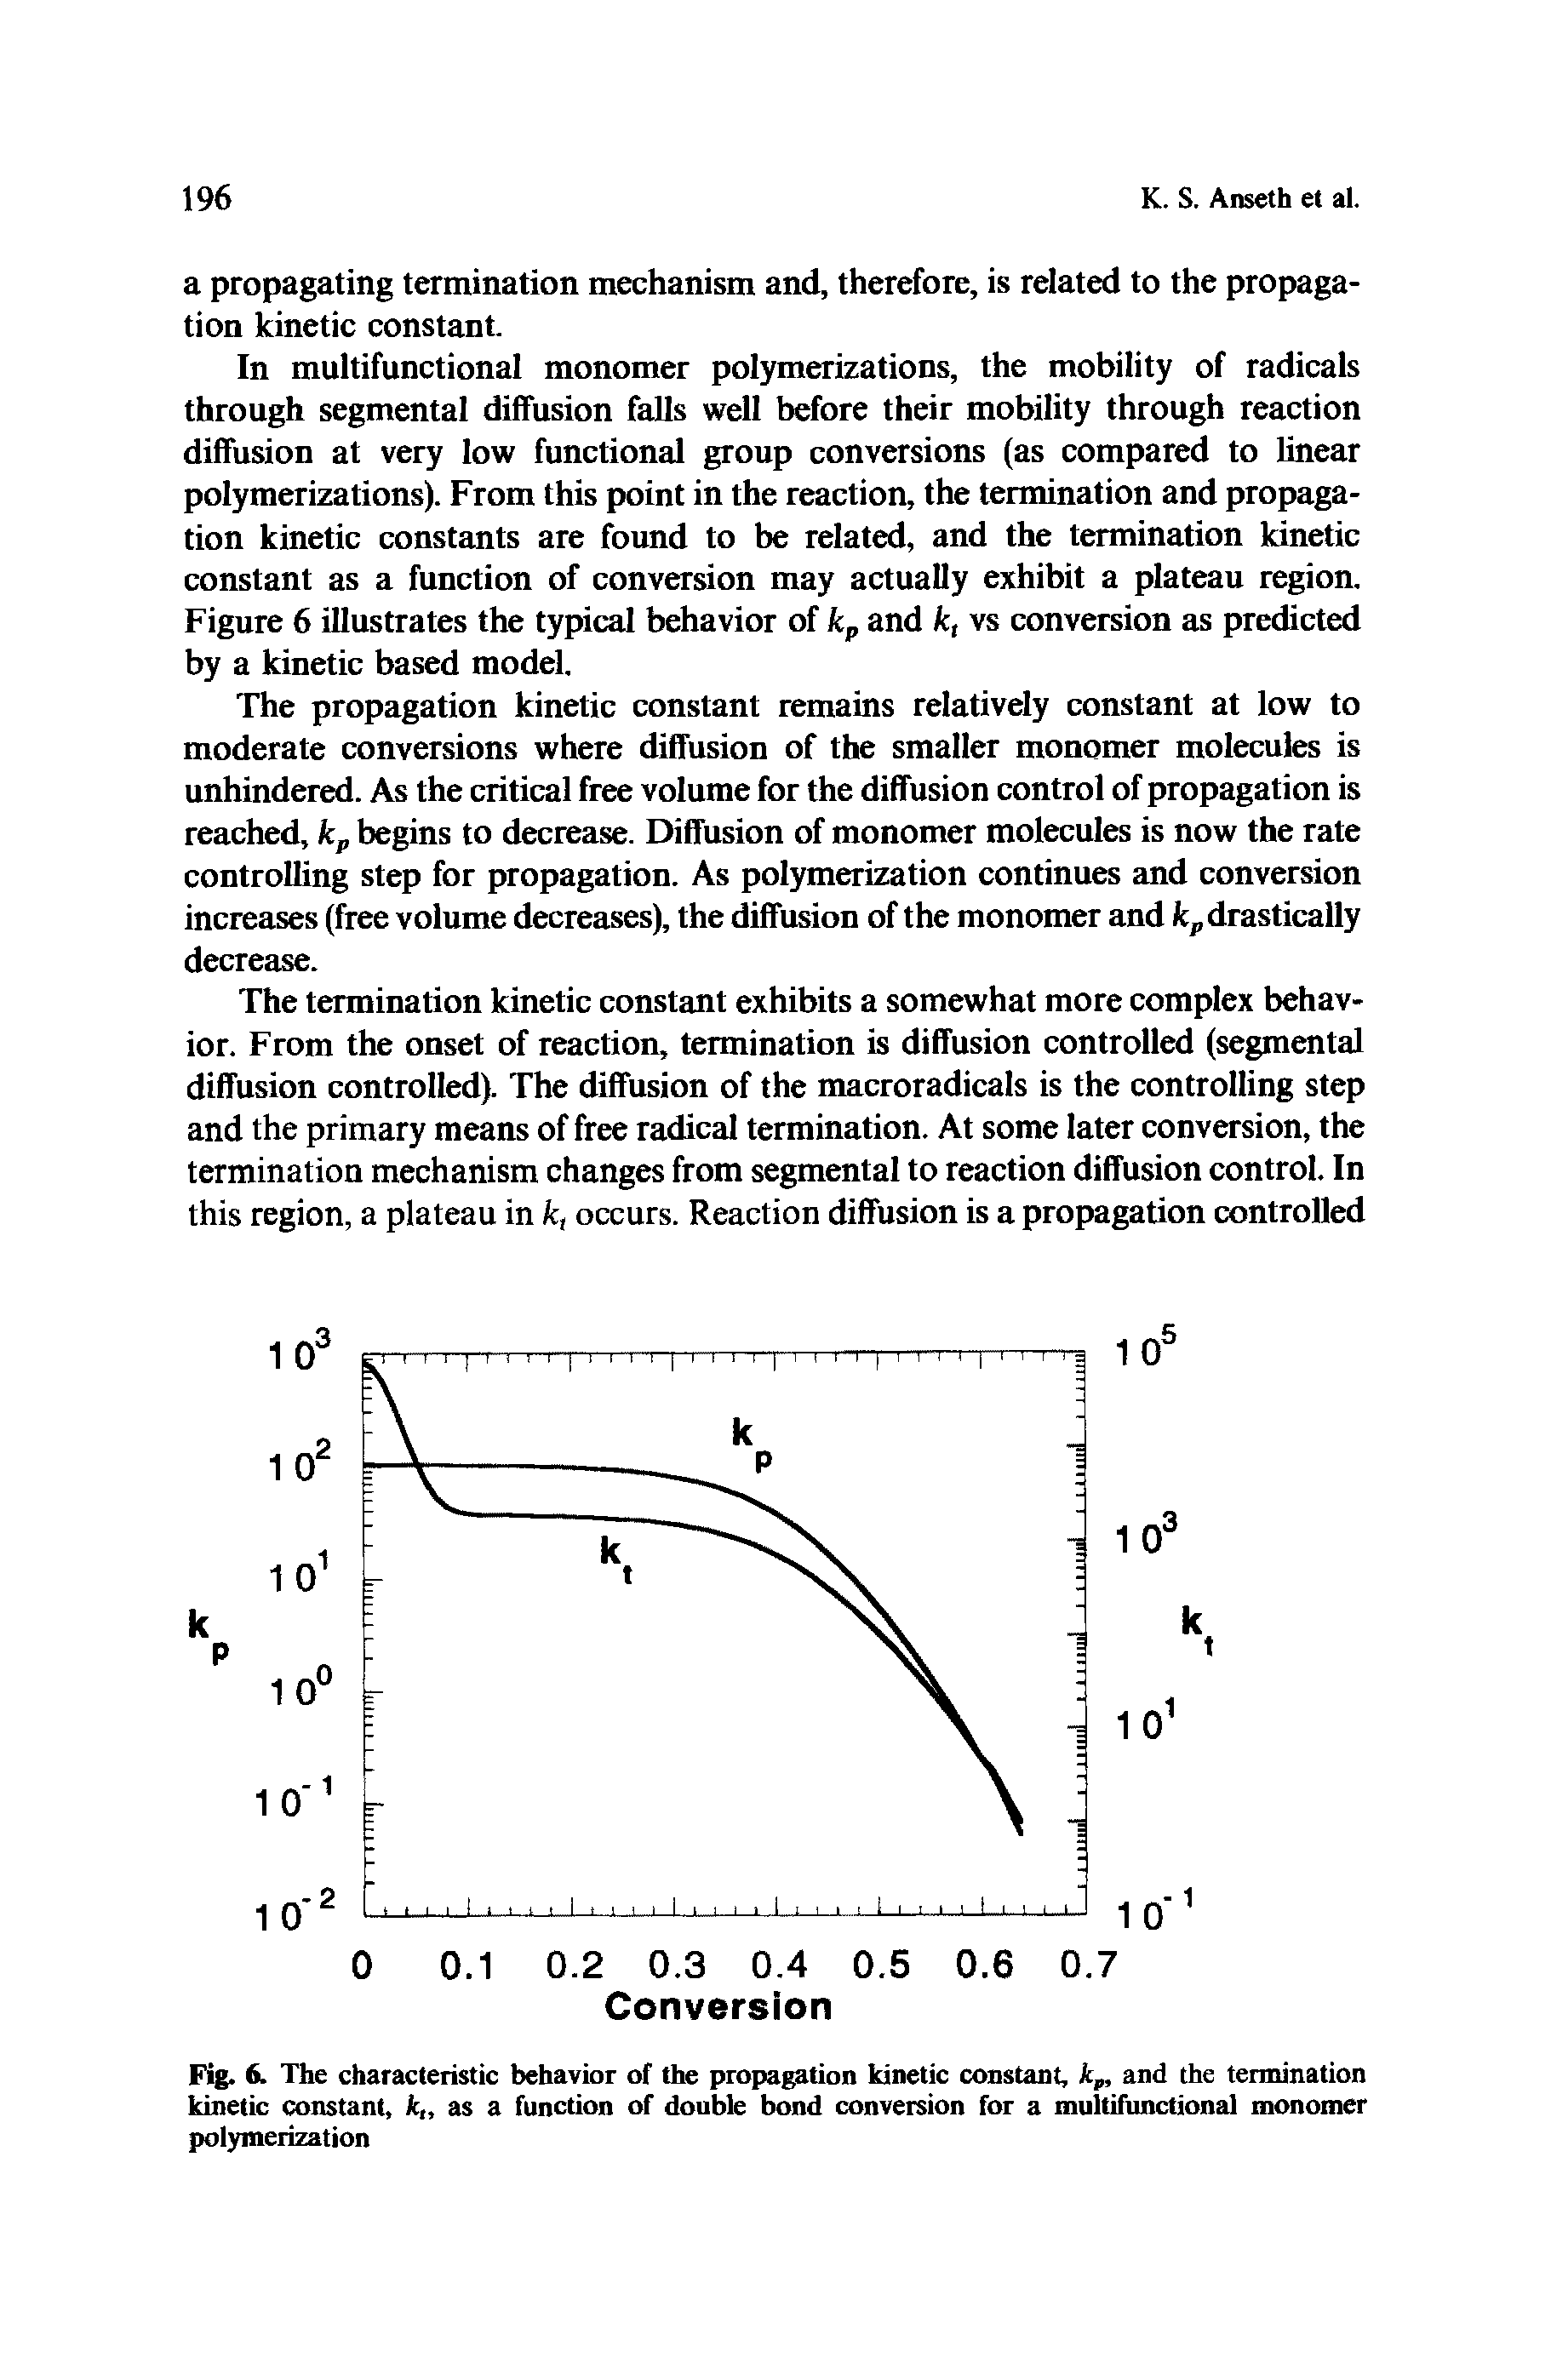 Fig. 6. The characteristic behavior of the propagation kinetic constant, kp, and the termination kinetic constant, k as a function of double bond conversion for a multifunctional monomer polymerization...